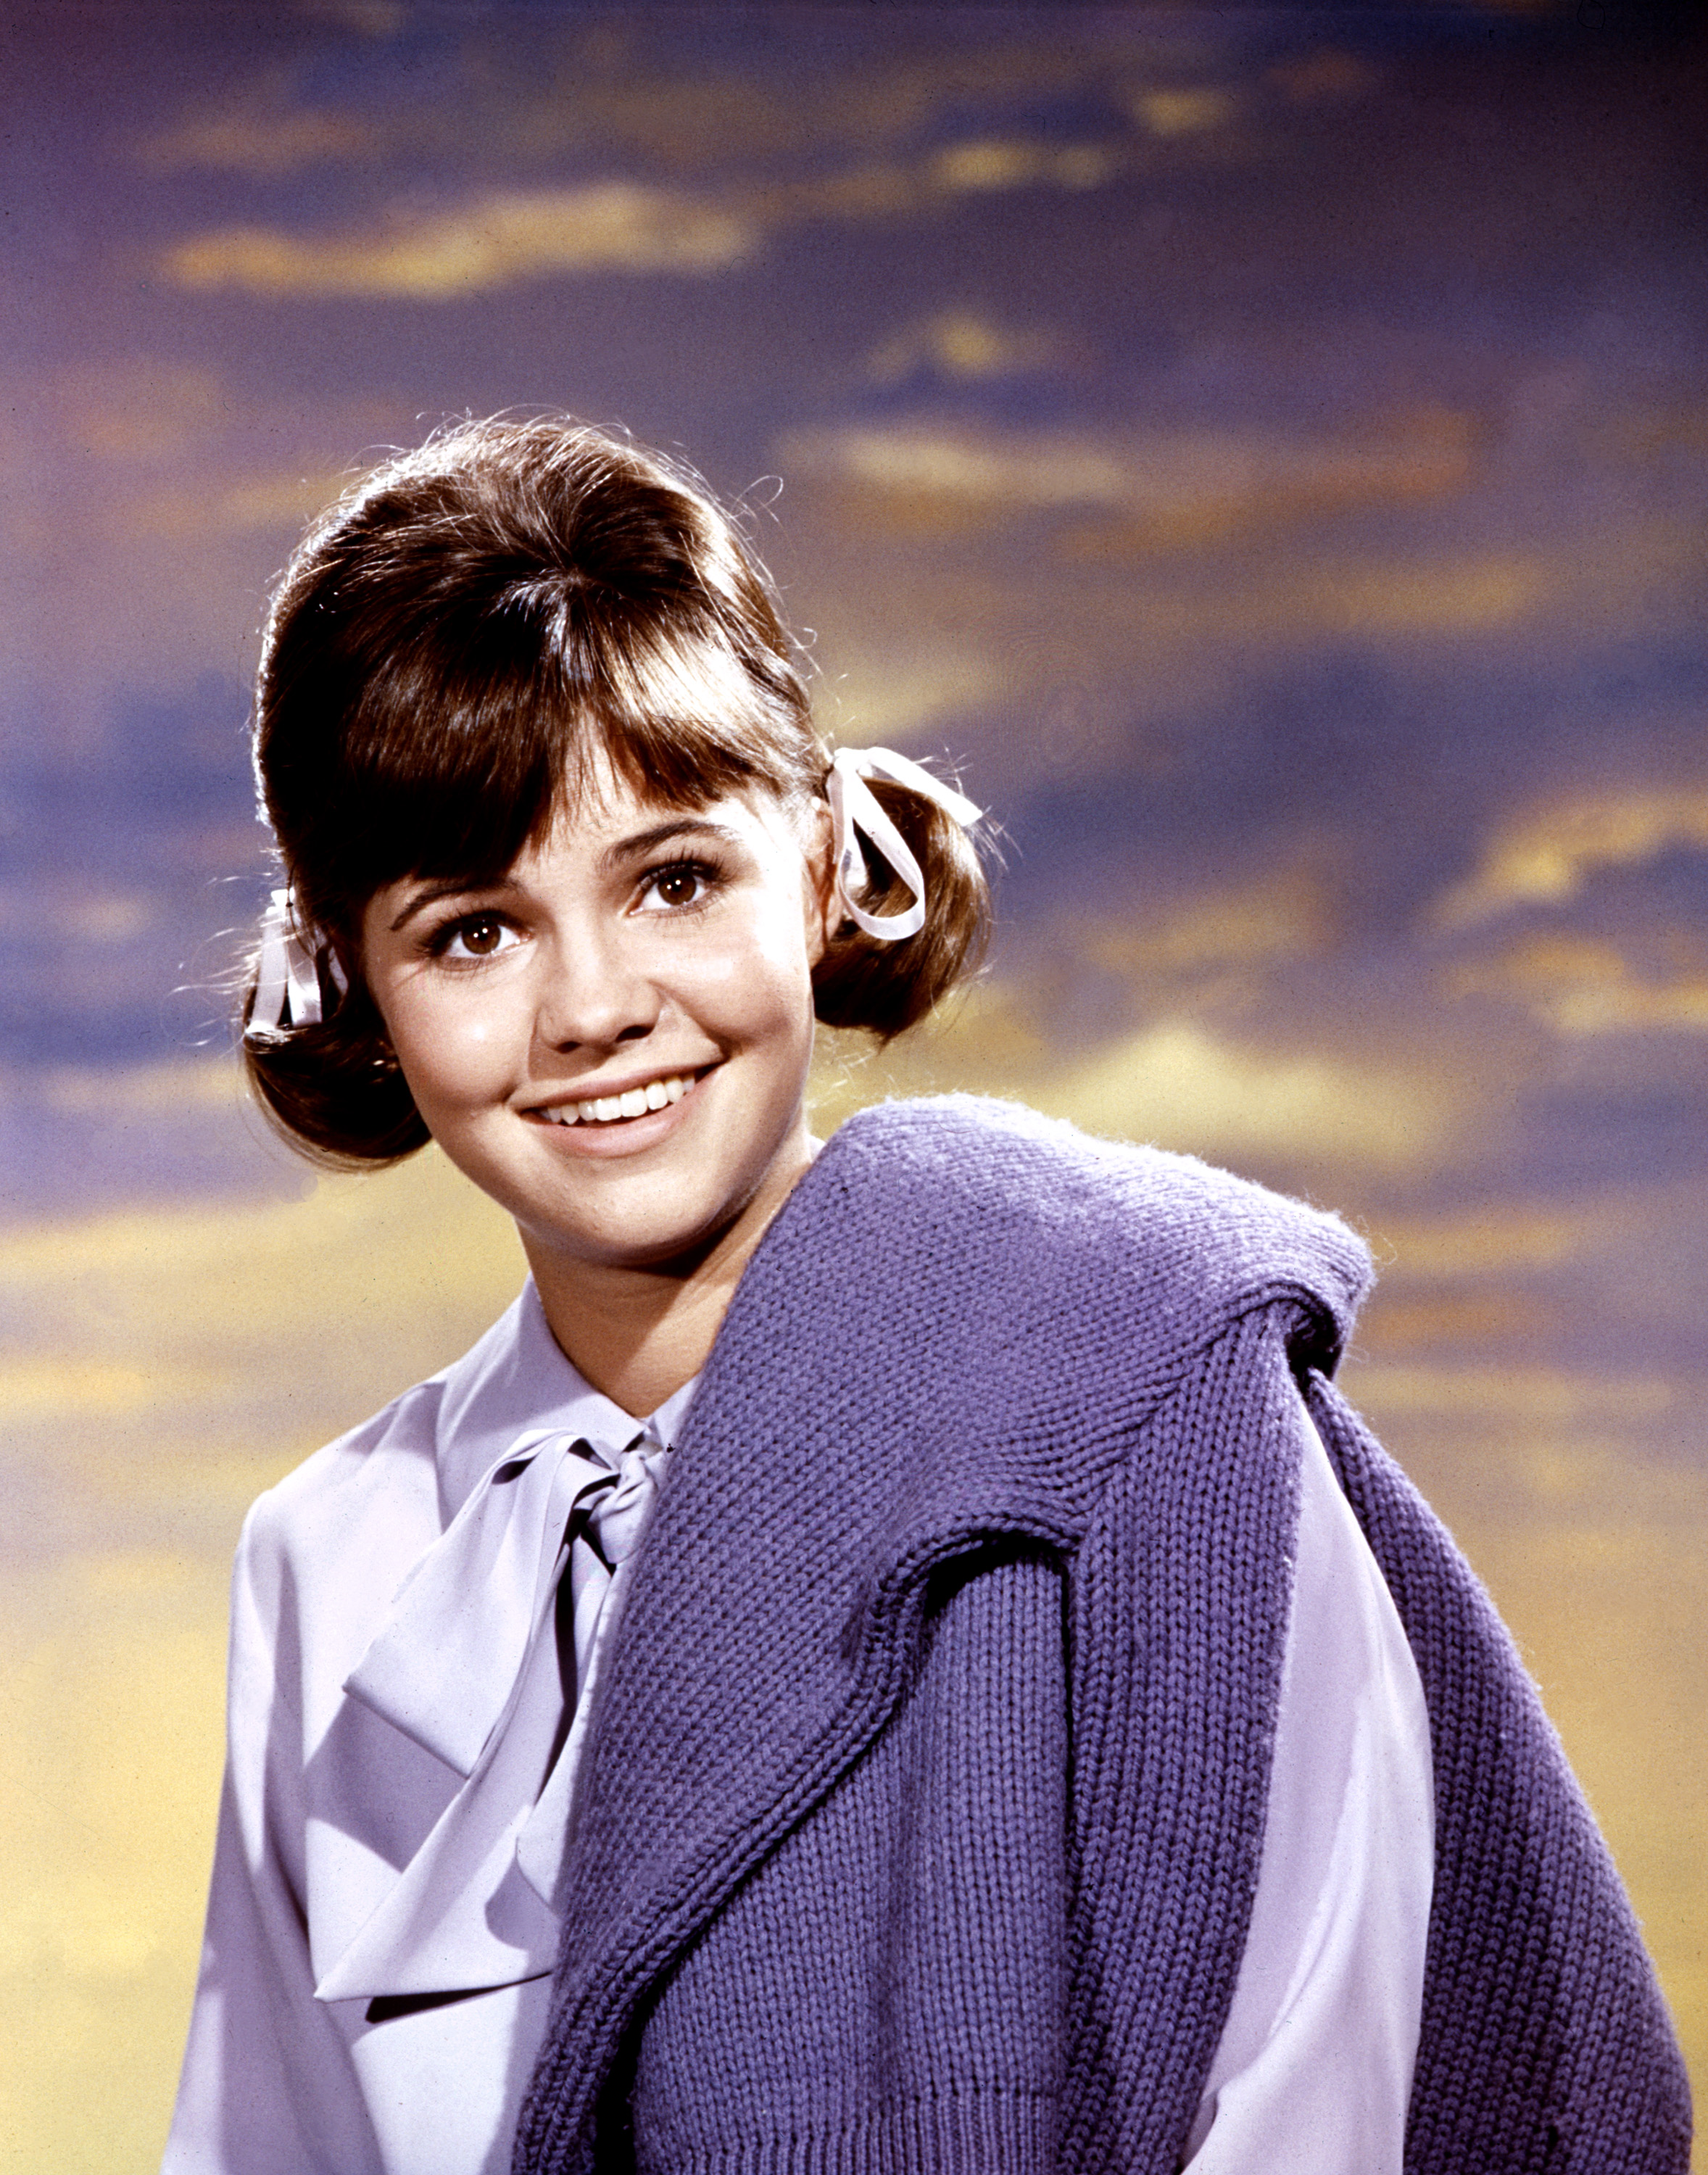 Actress Sally Field in the American sitcom "Gidget" on September 15, 1965 | Source: Getty Images